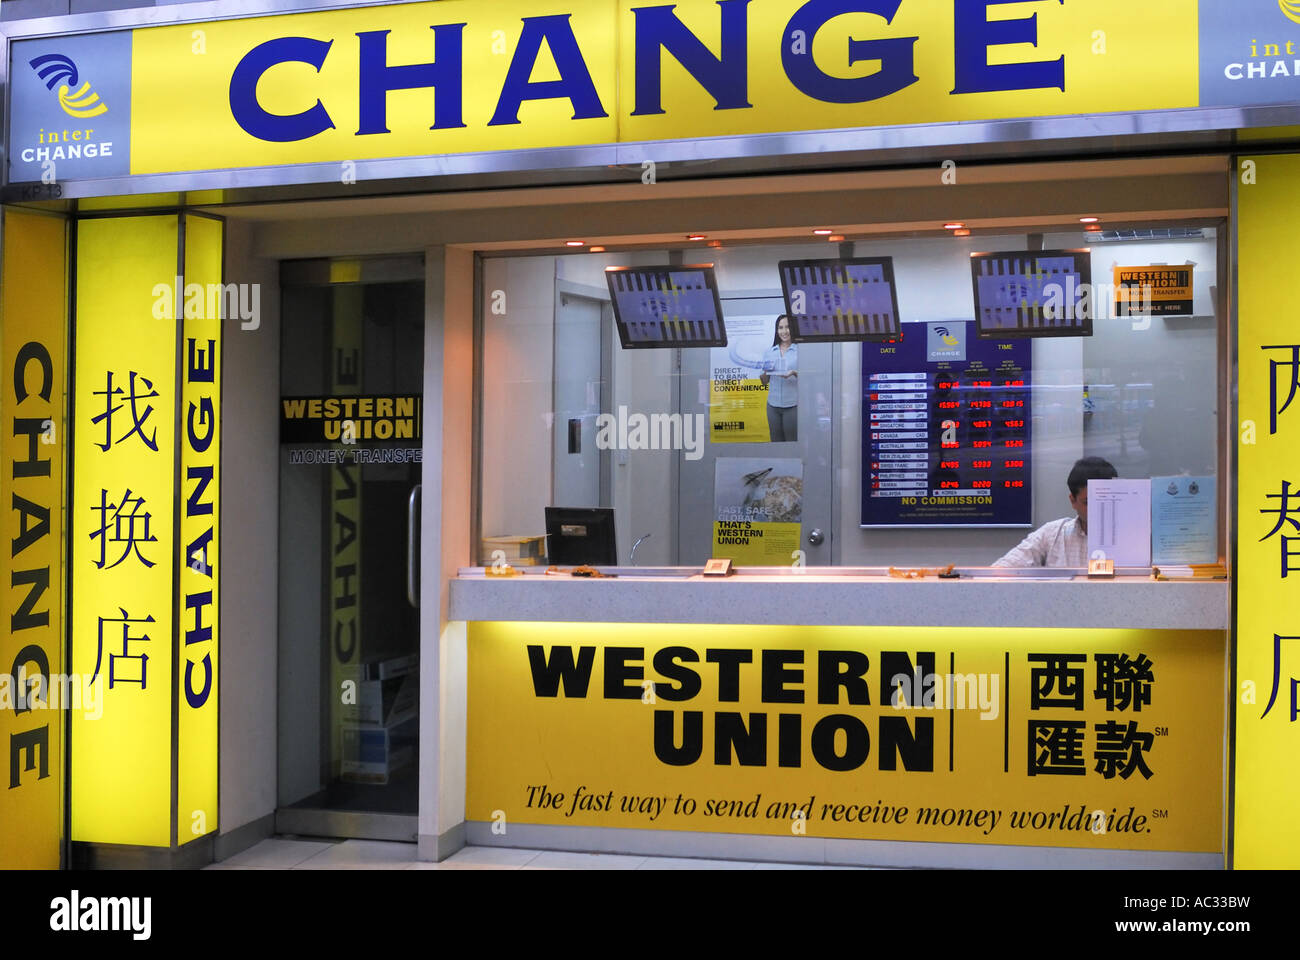 Western Union Hong Kong High Resolution Stock Photography and Images - Alamy